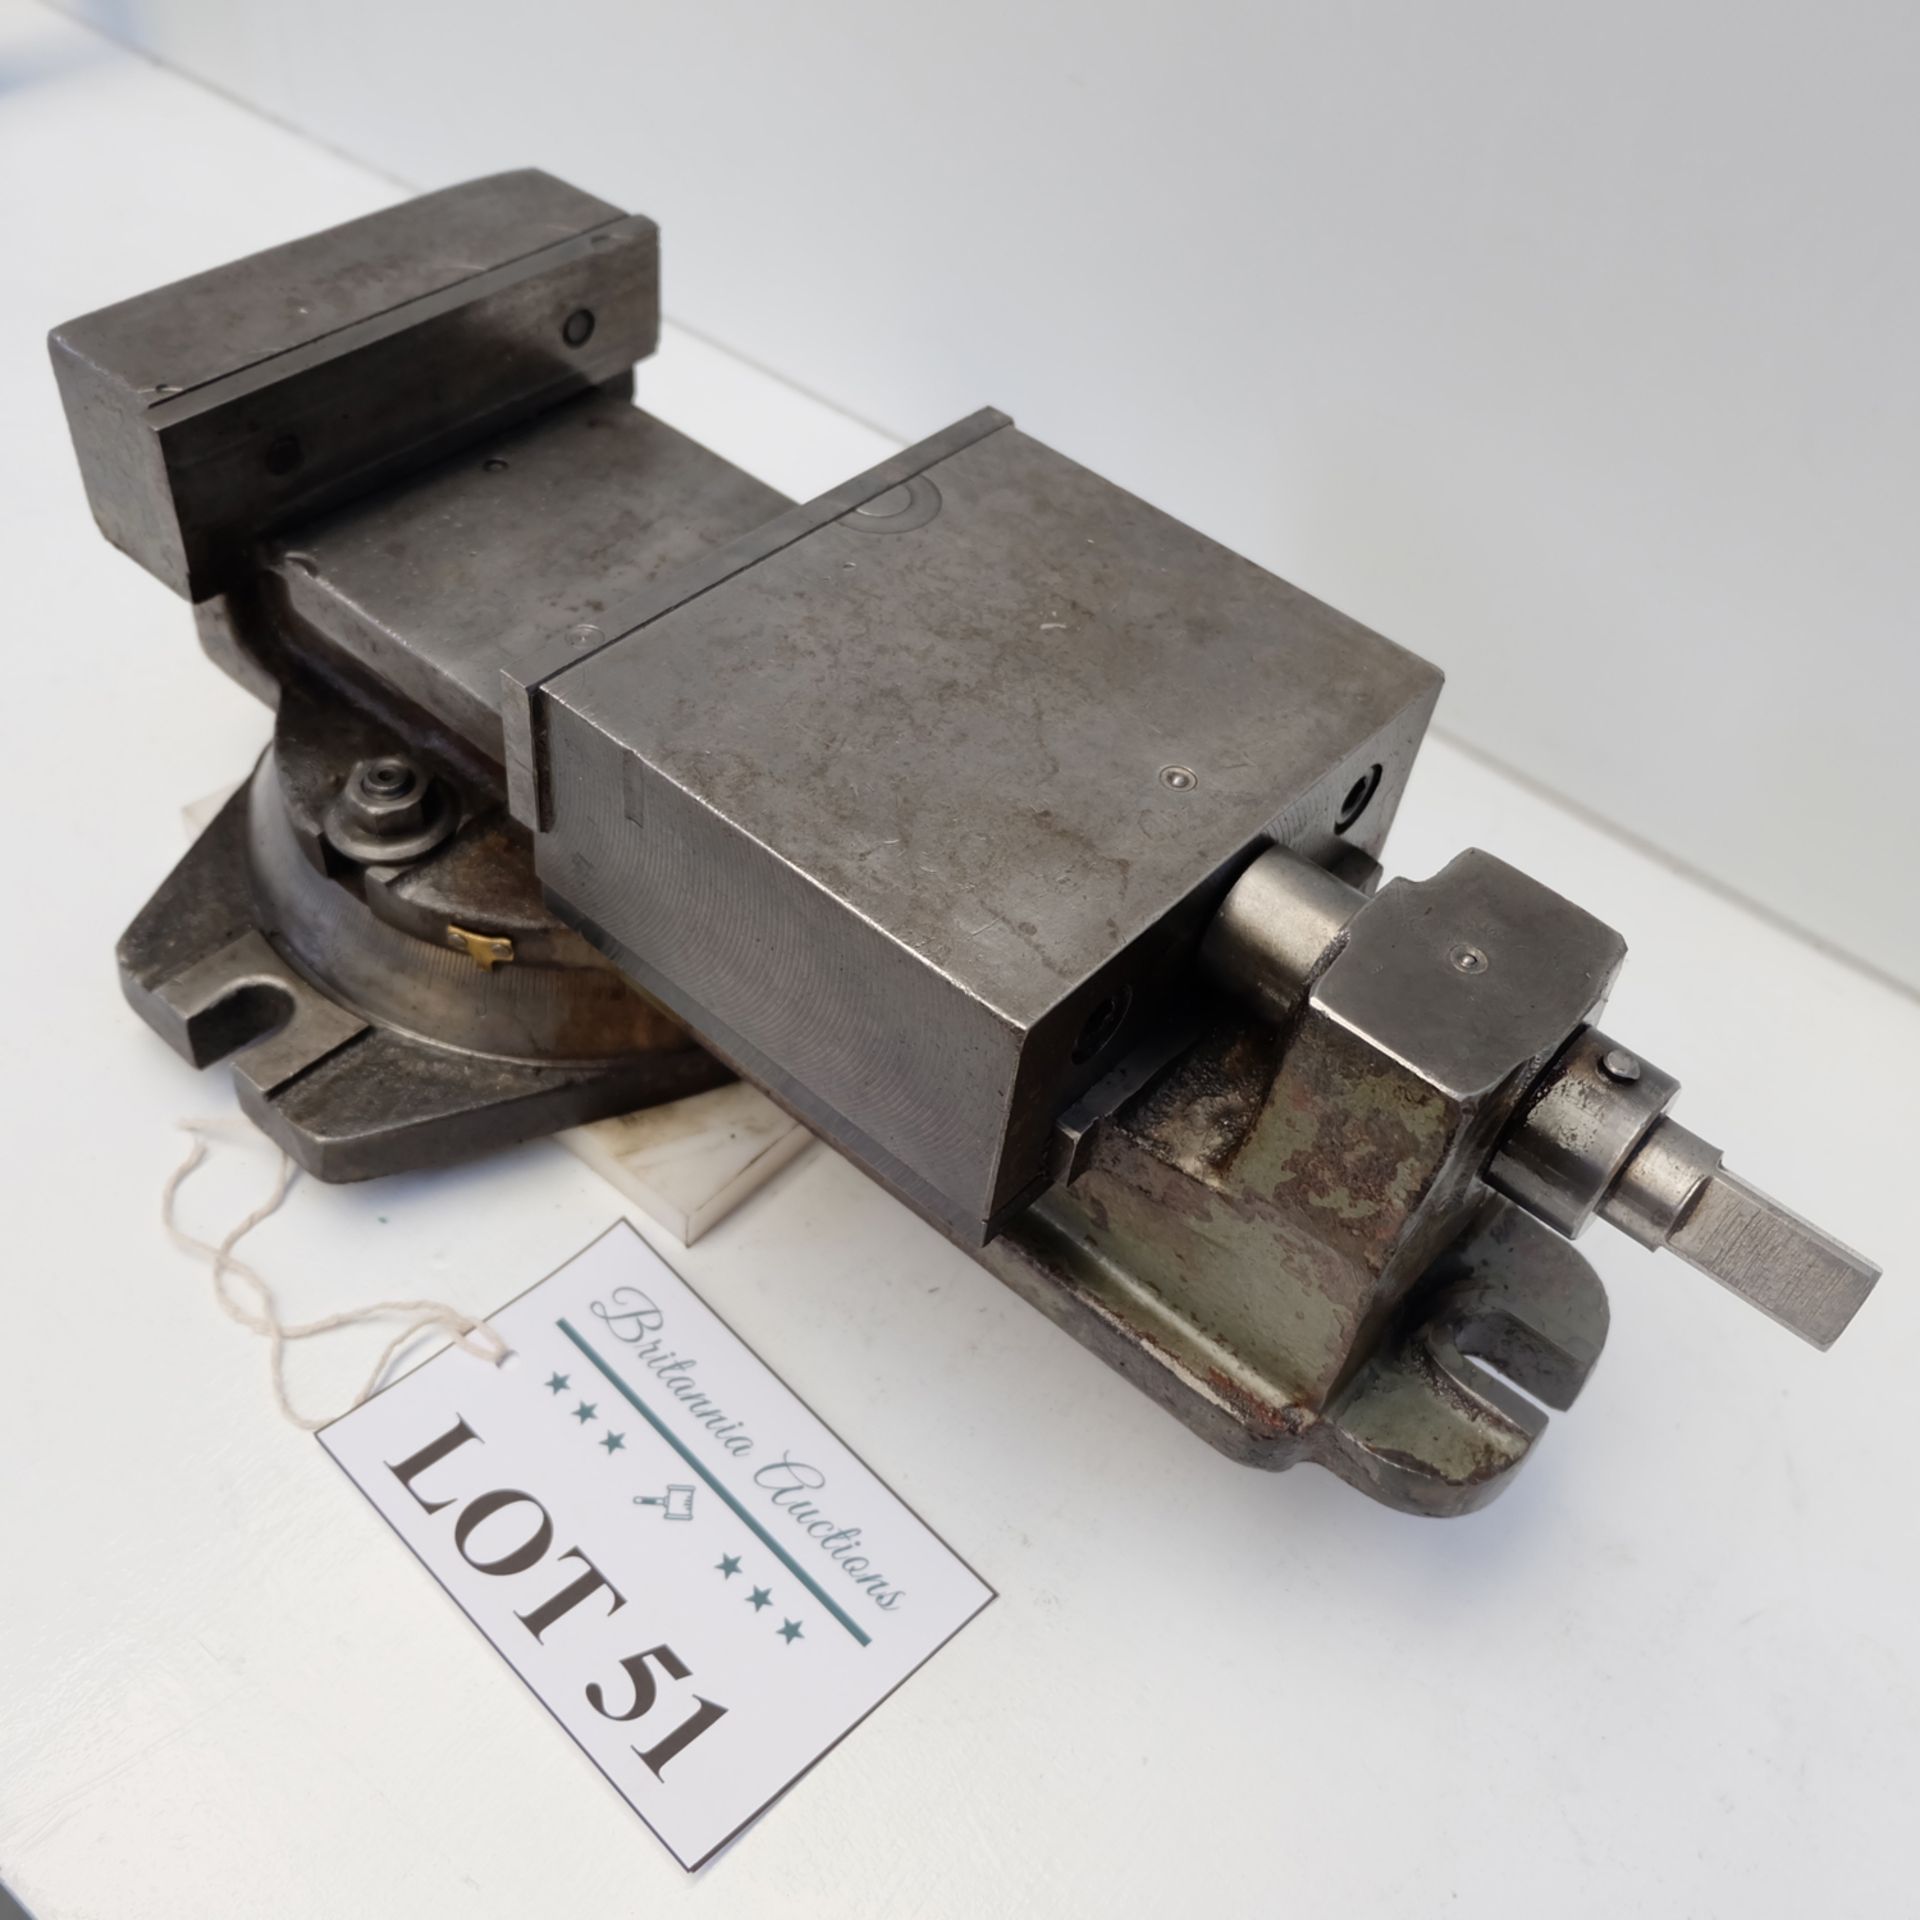 Swivelling Machine Vice. Jaw Width 6". Max Opening 4 1/4". Jaw Height 1 1/2" Approx. - Image 3 of 4